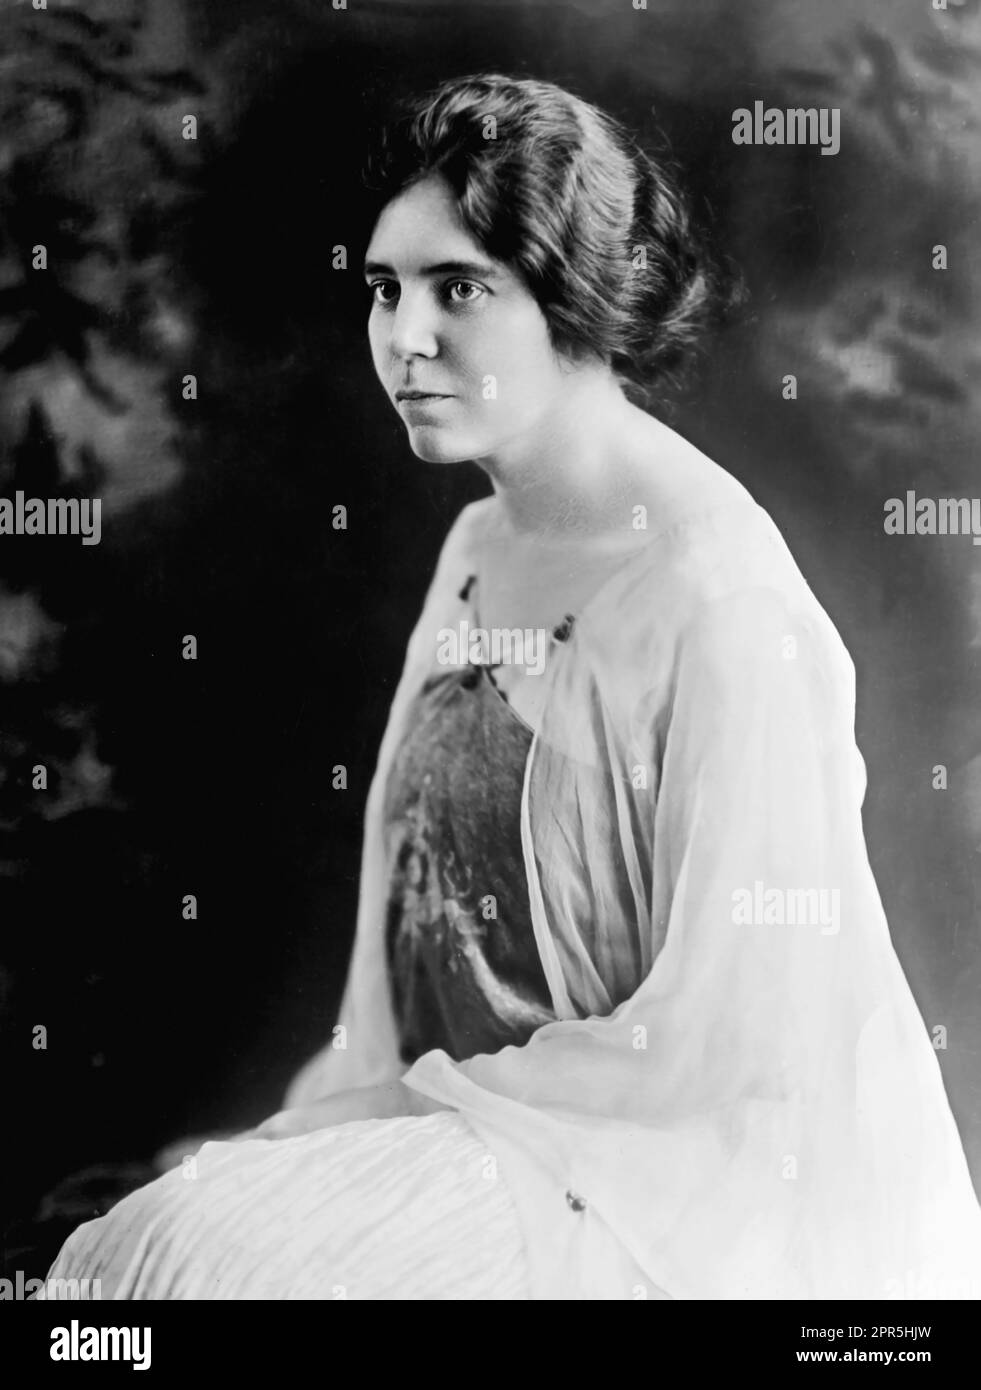 Alice Paul. Portrait of the American Quaker suffragist and women's rights activist, Alice Stokes Paul (1885-1977) by Bain News Service,  c. 1925 Stock Photo